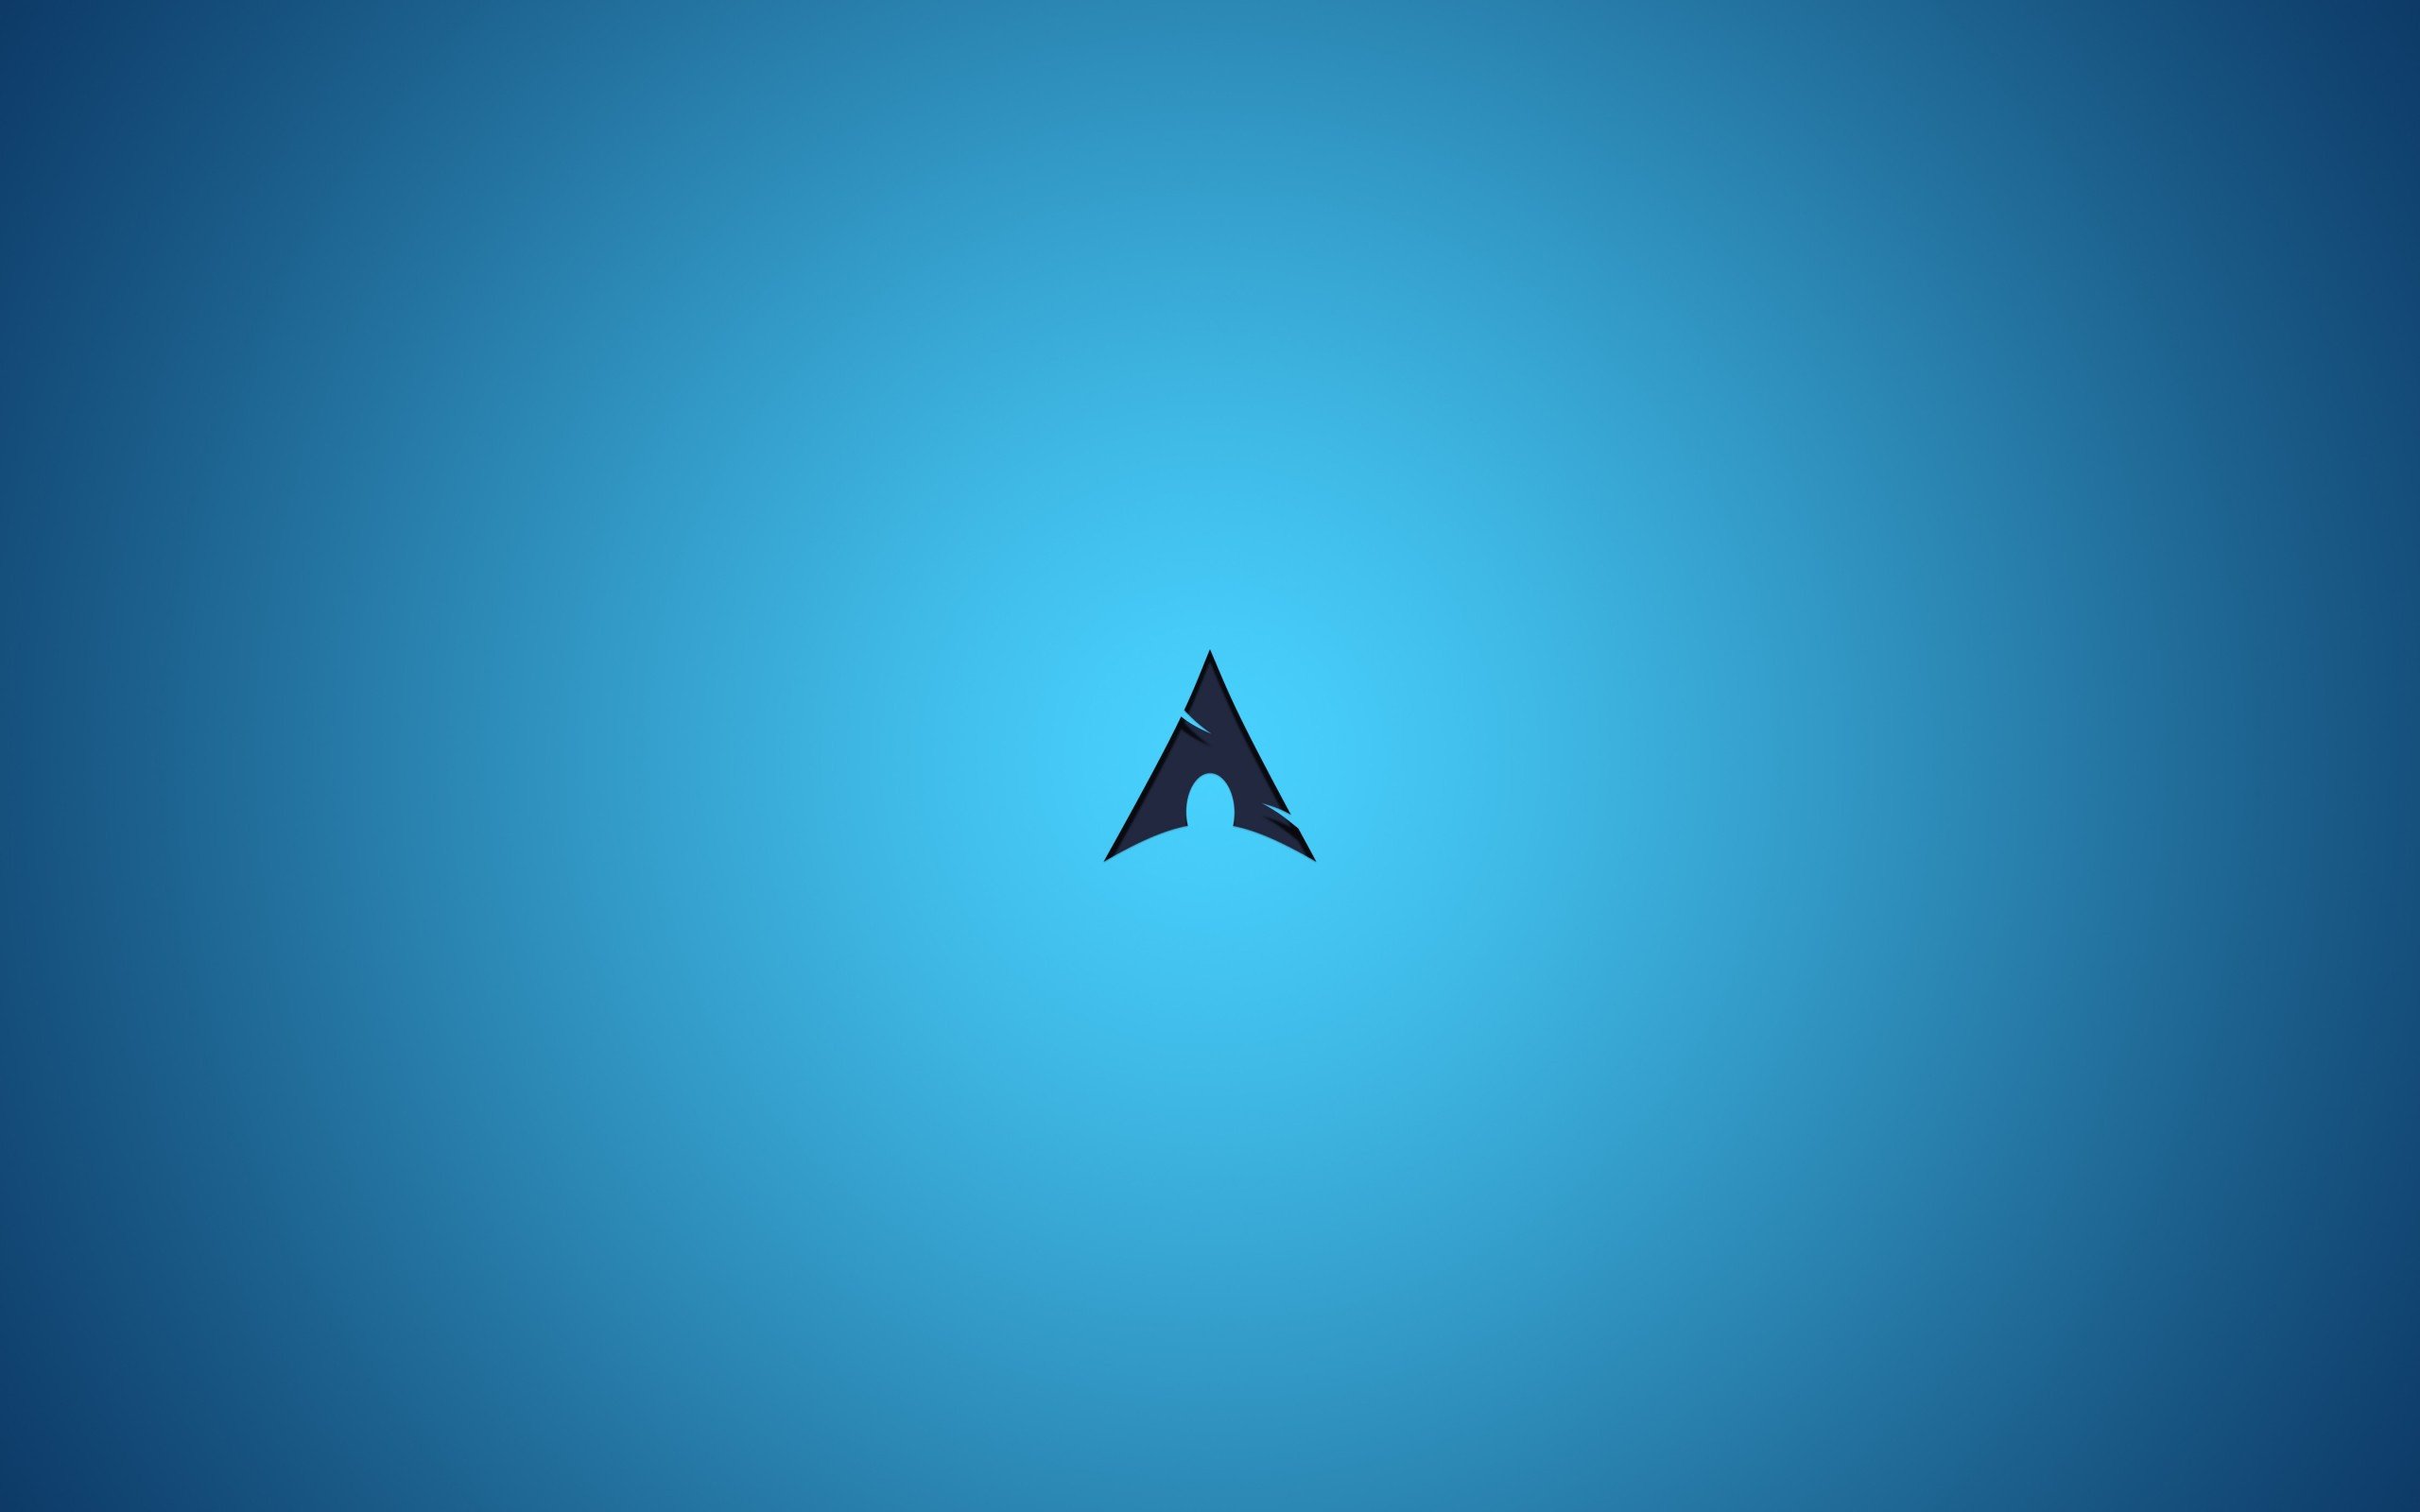 Download 2560x1600 Arch Linux, Logo, Minimal Art, Blue Background Wallpaper for MacBook Pro 13 inch